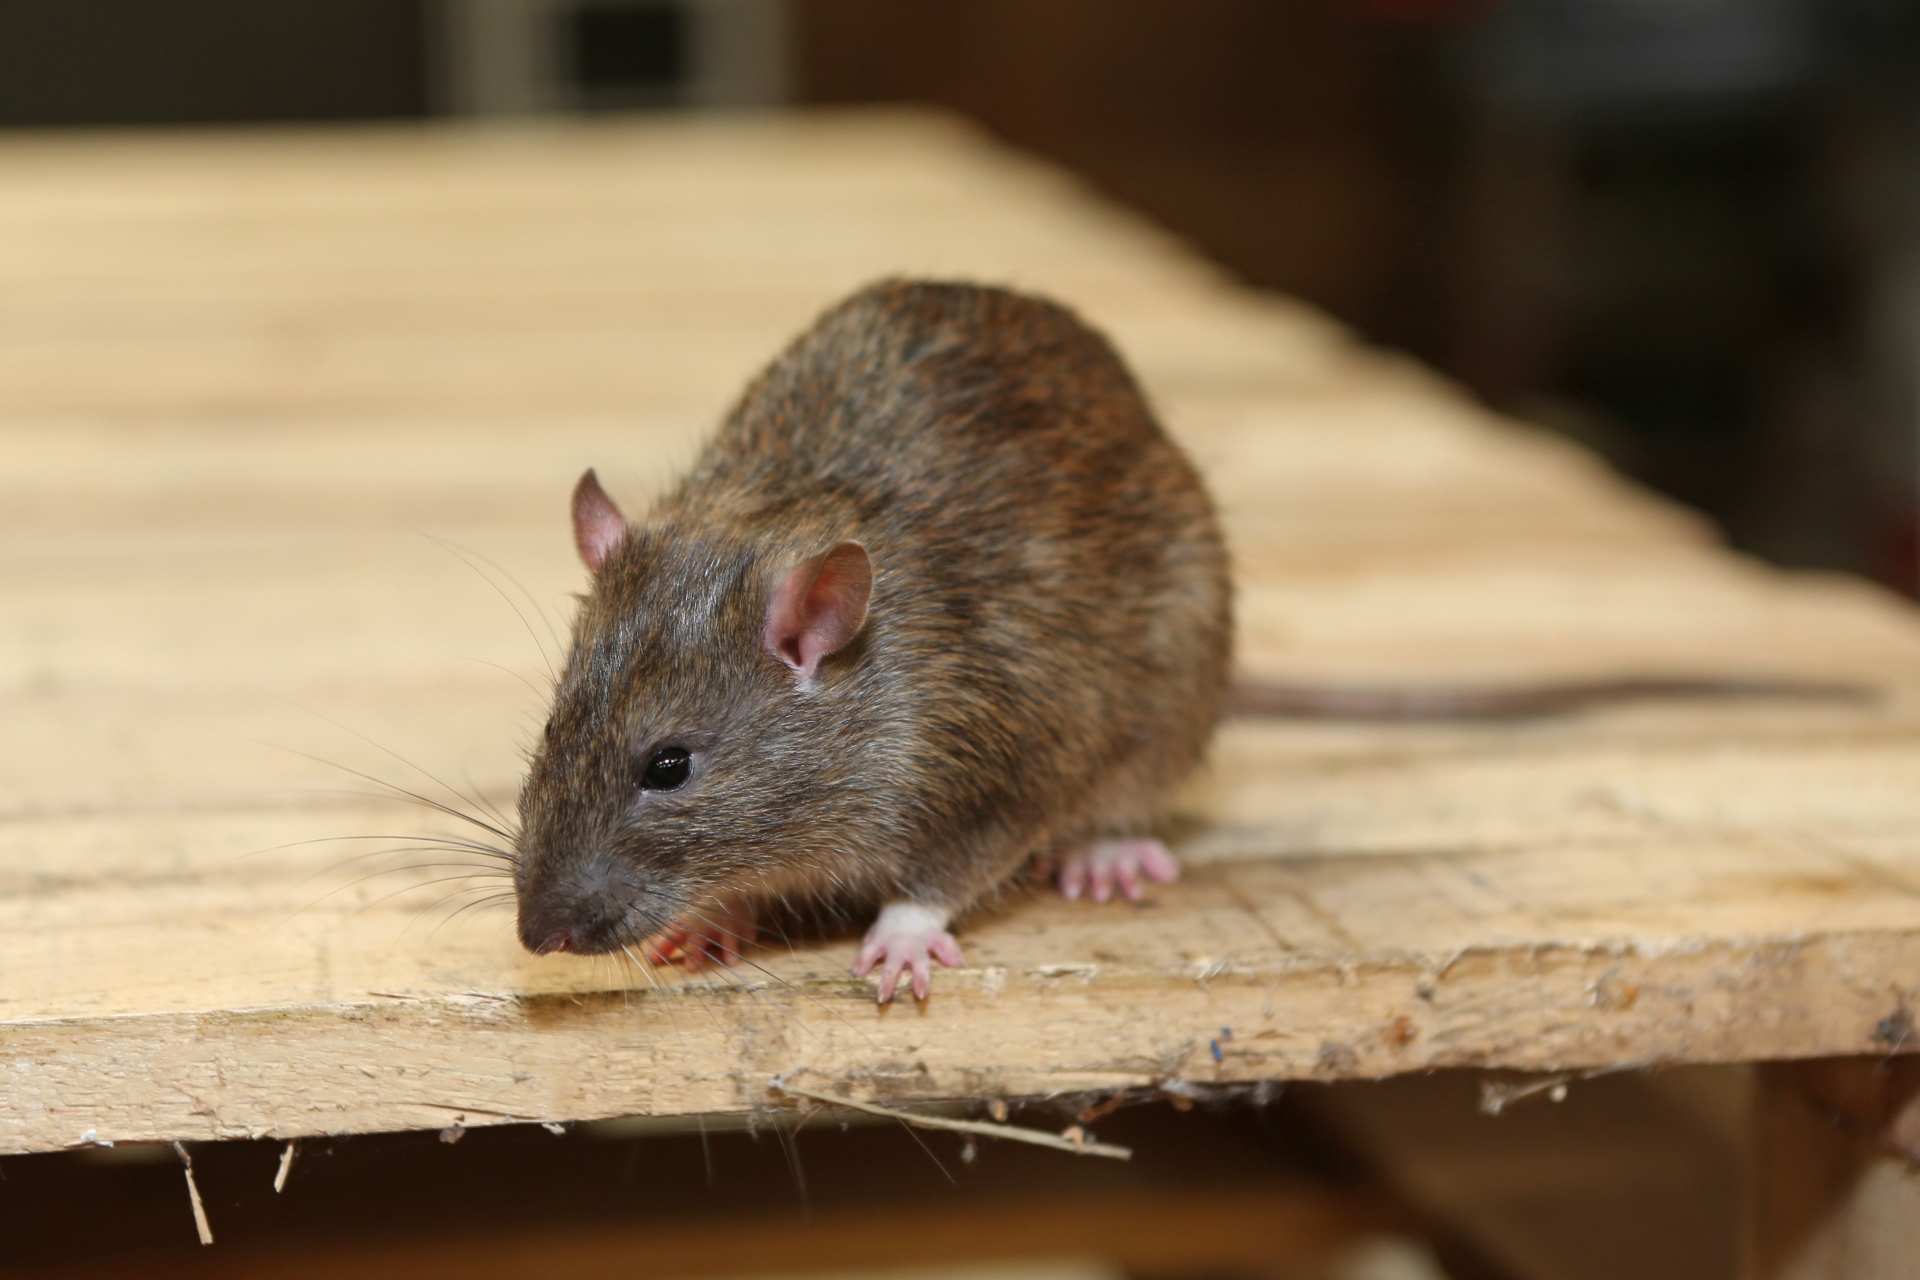 Rat extermination, Pest Control in Yeading, UB4. Call Now 020 8166 9746